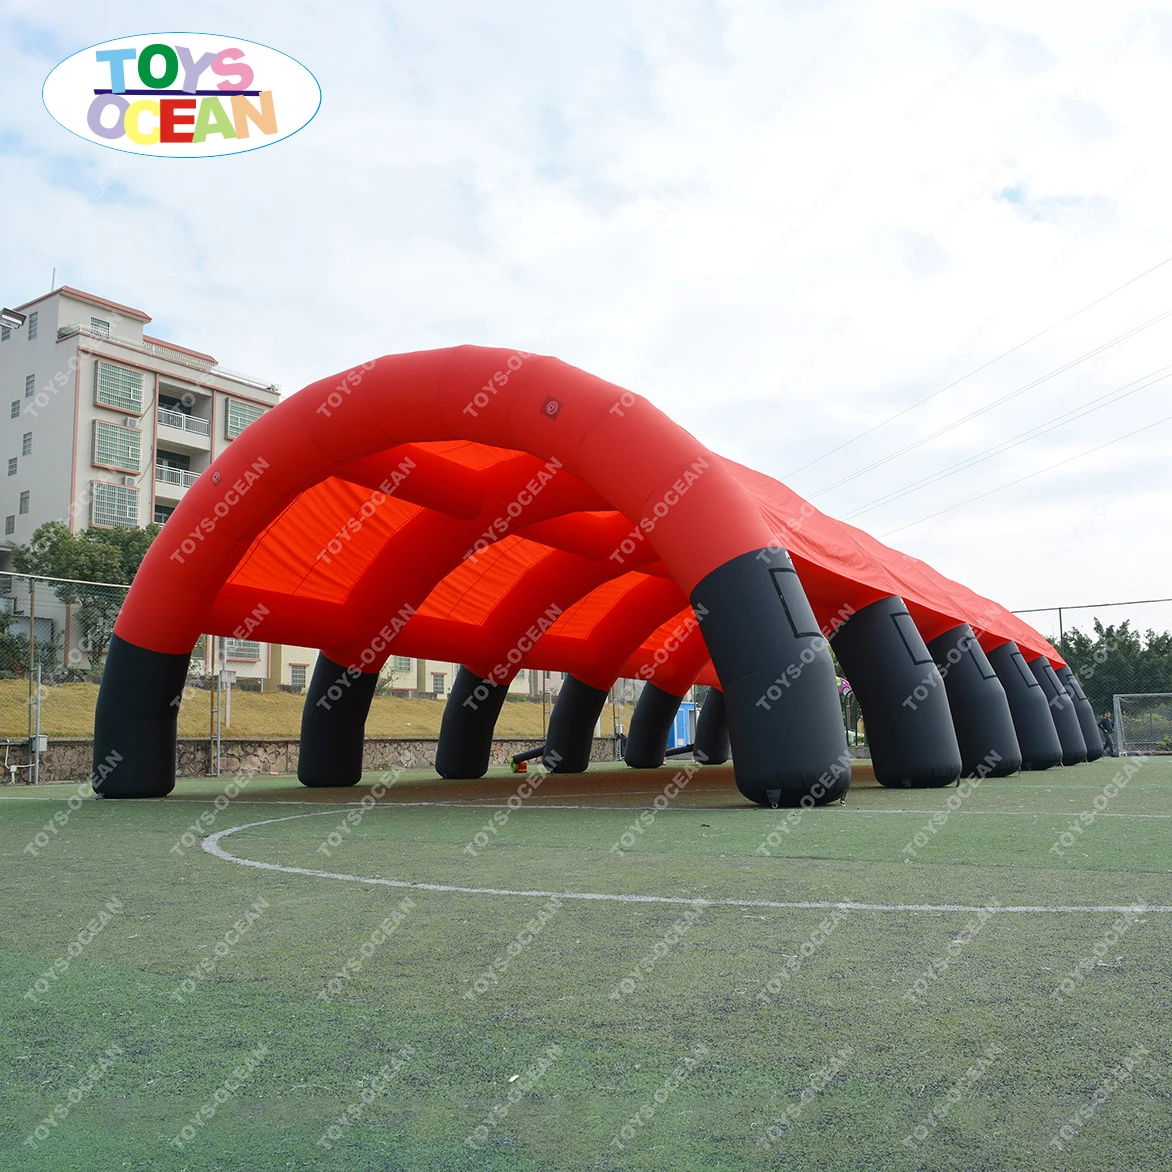 2021 new Outdoor large red inflatable activity tent Inflatable paintball arena sports tent